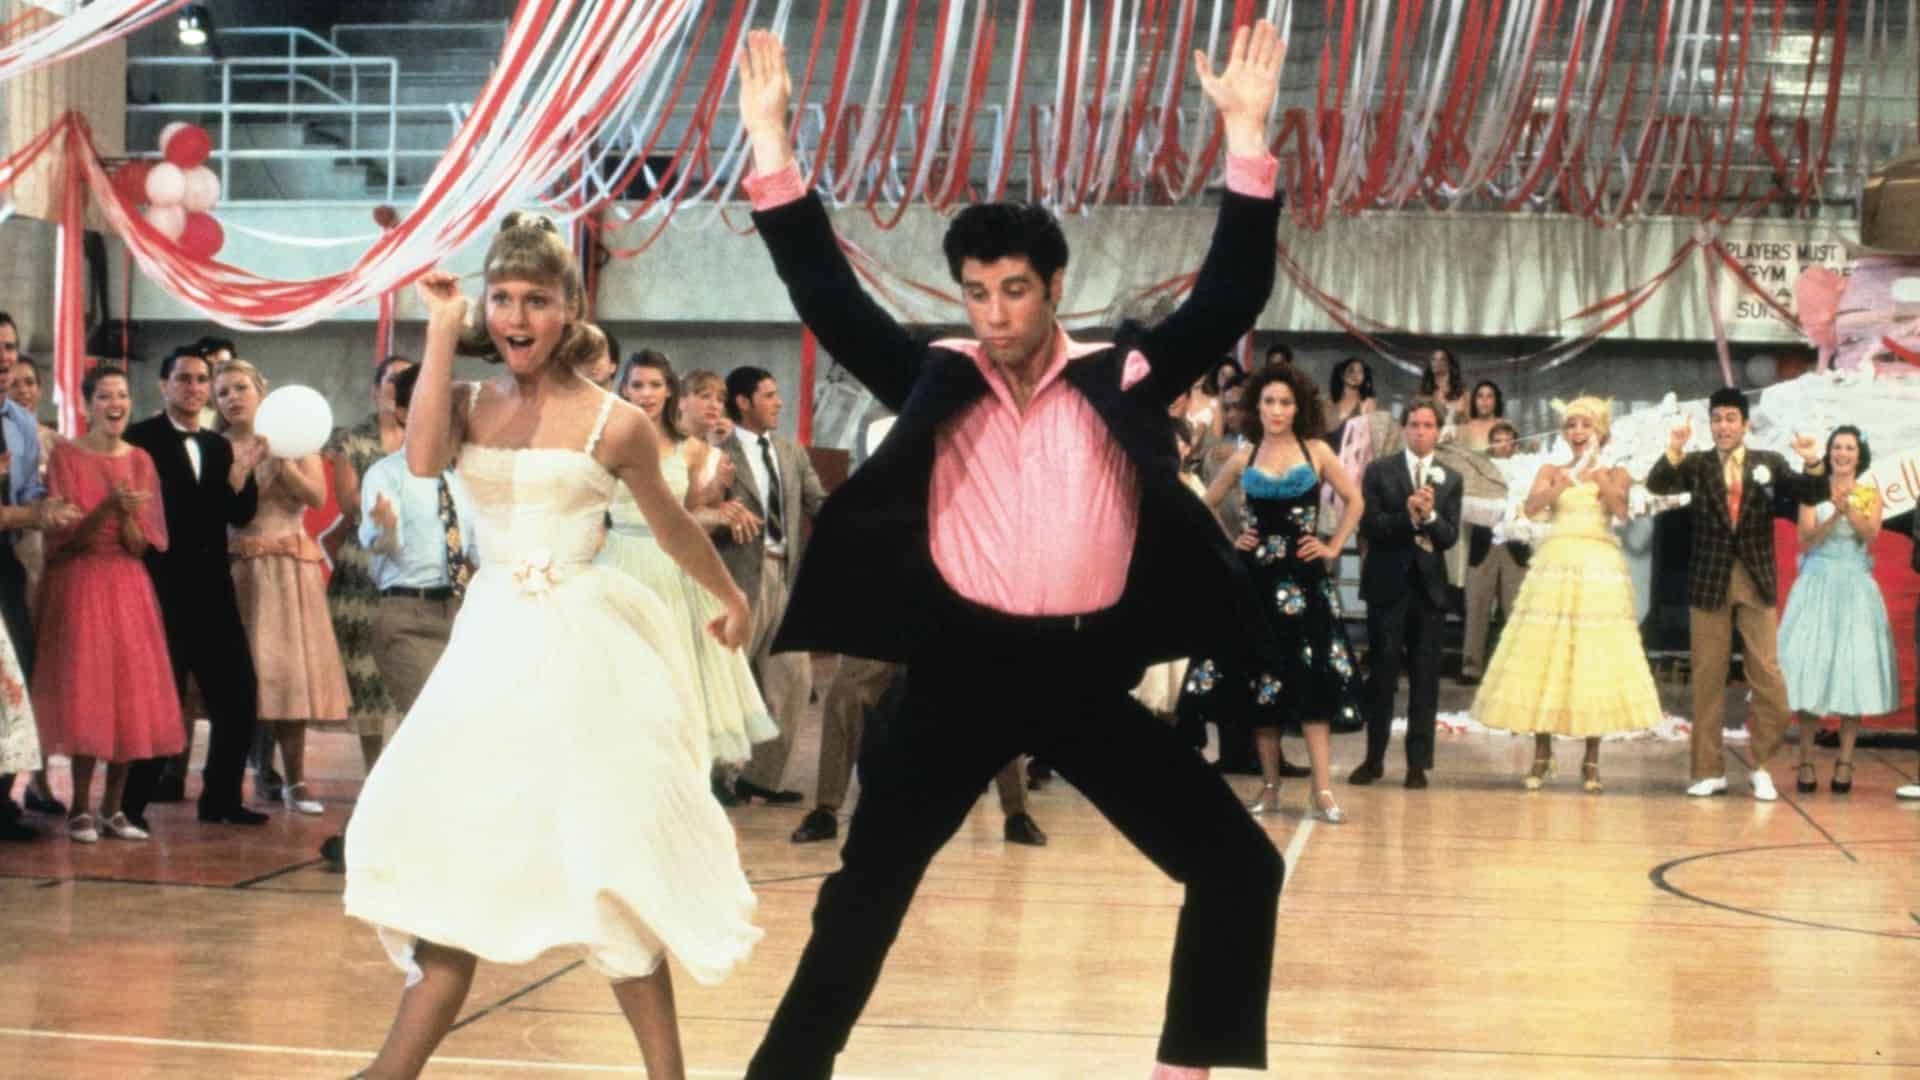 A teenage girl and teenage boy dancing in a high school gym in this image from Paramount Pictures.